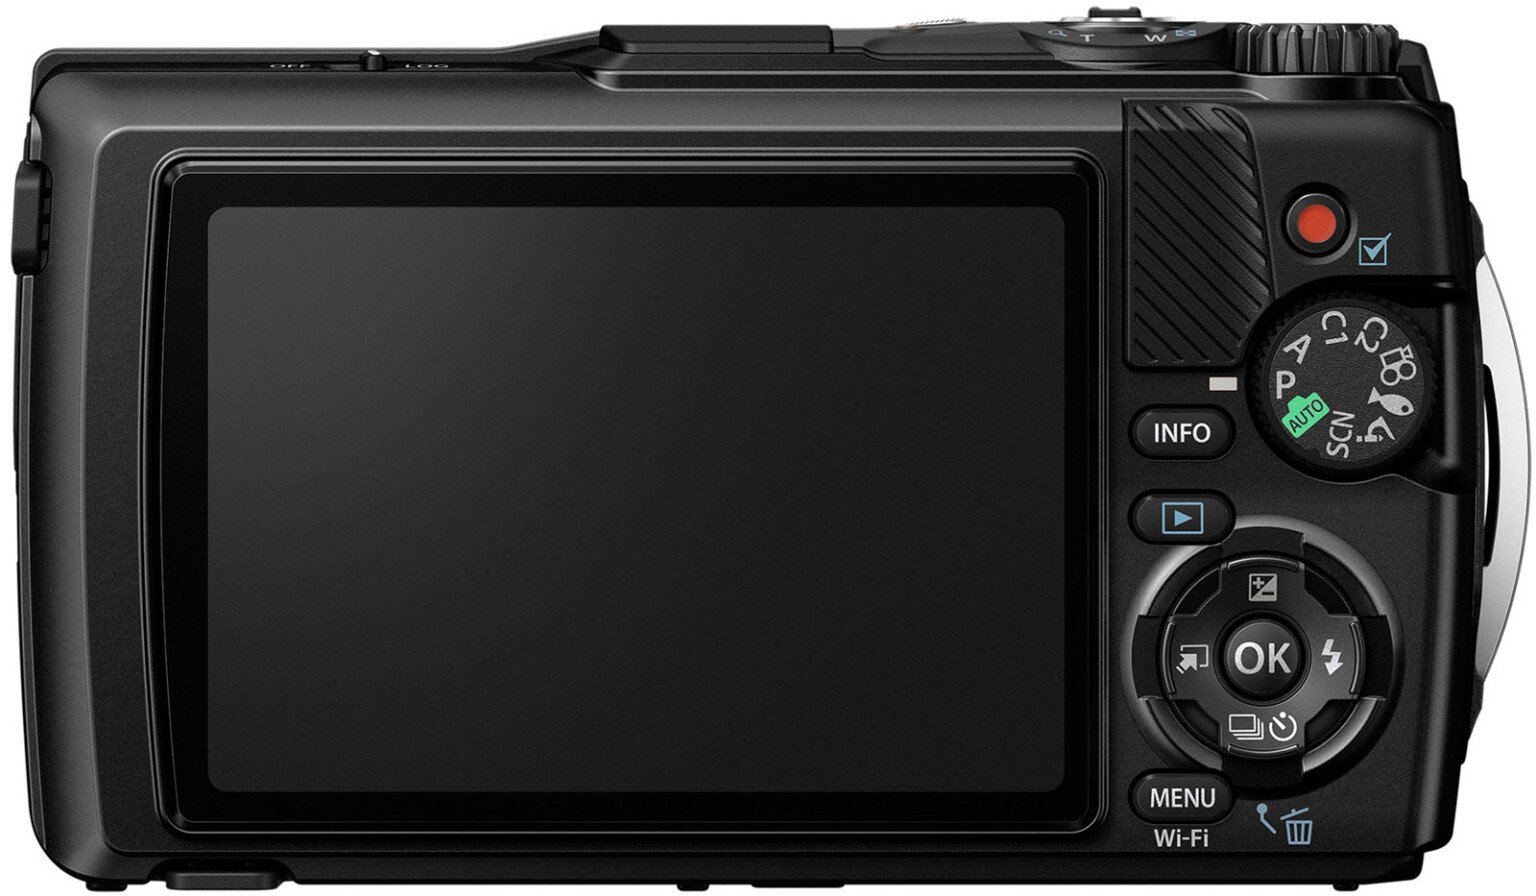 Om Systems Tough Tg 7 Is A Rugged Companion For Outdoor Photographers